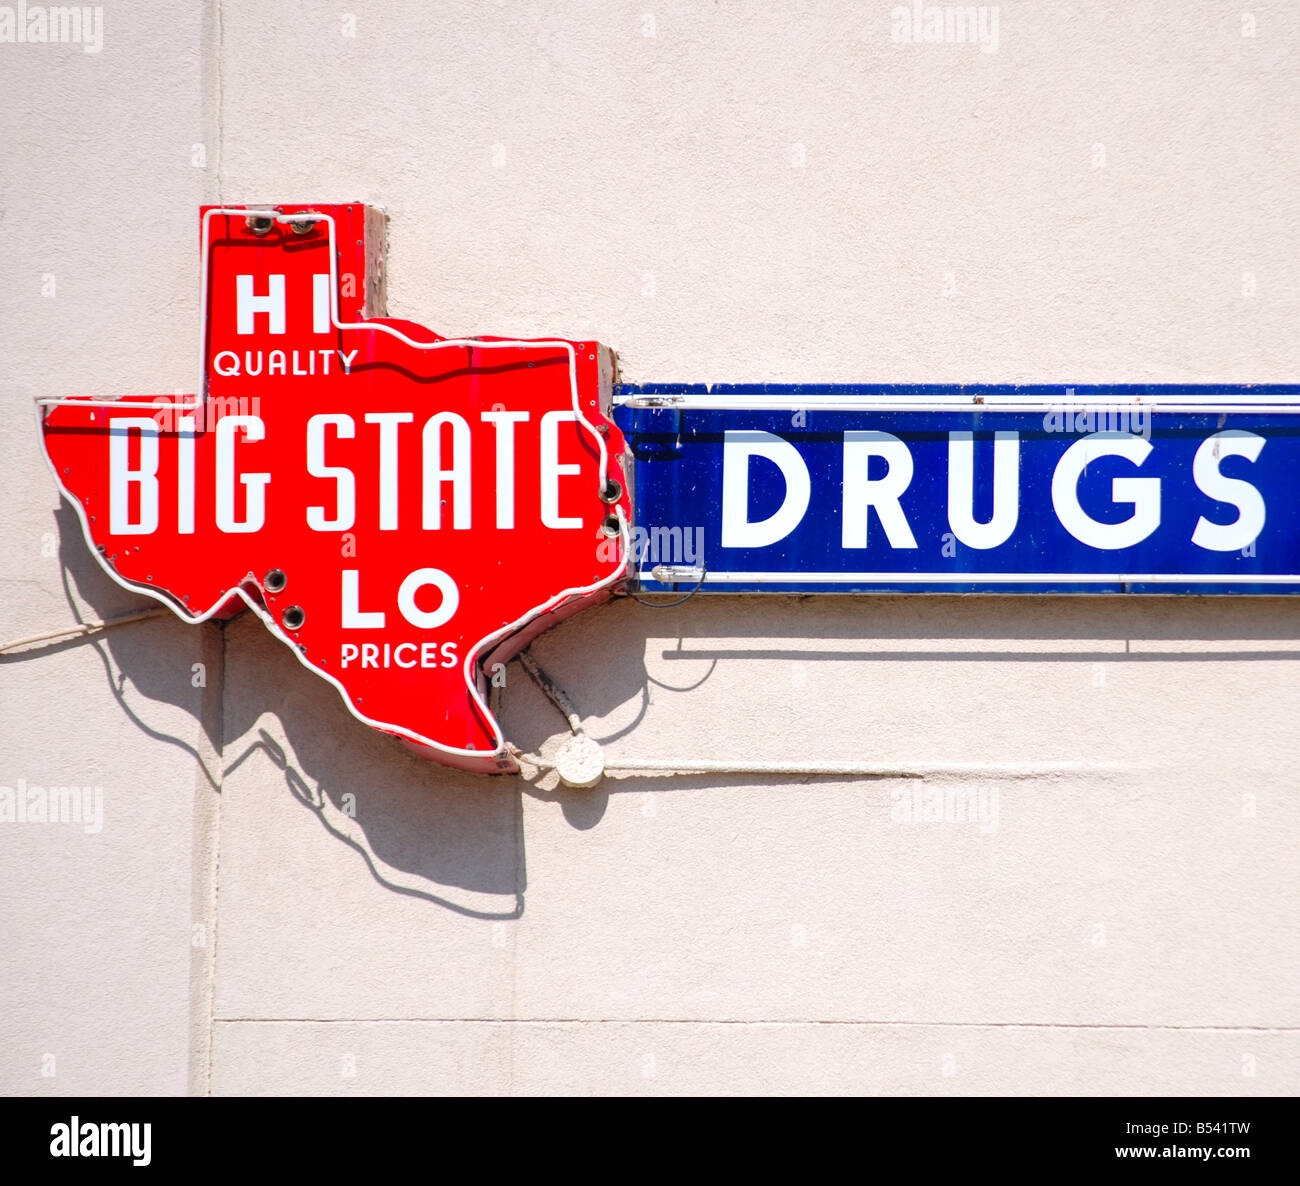 Big State Drug Store in downtown Irving, Texas Stock Photo